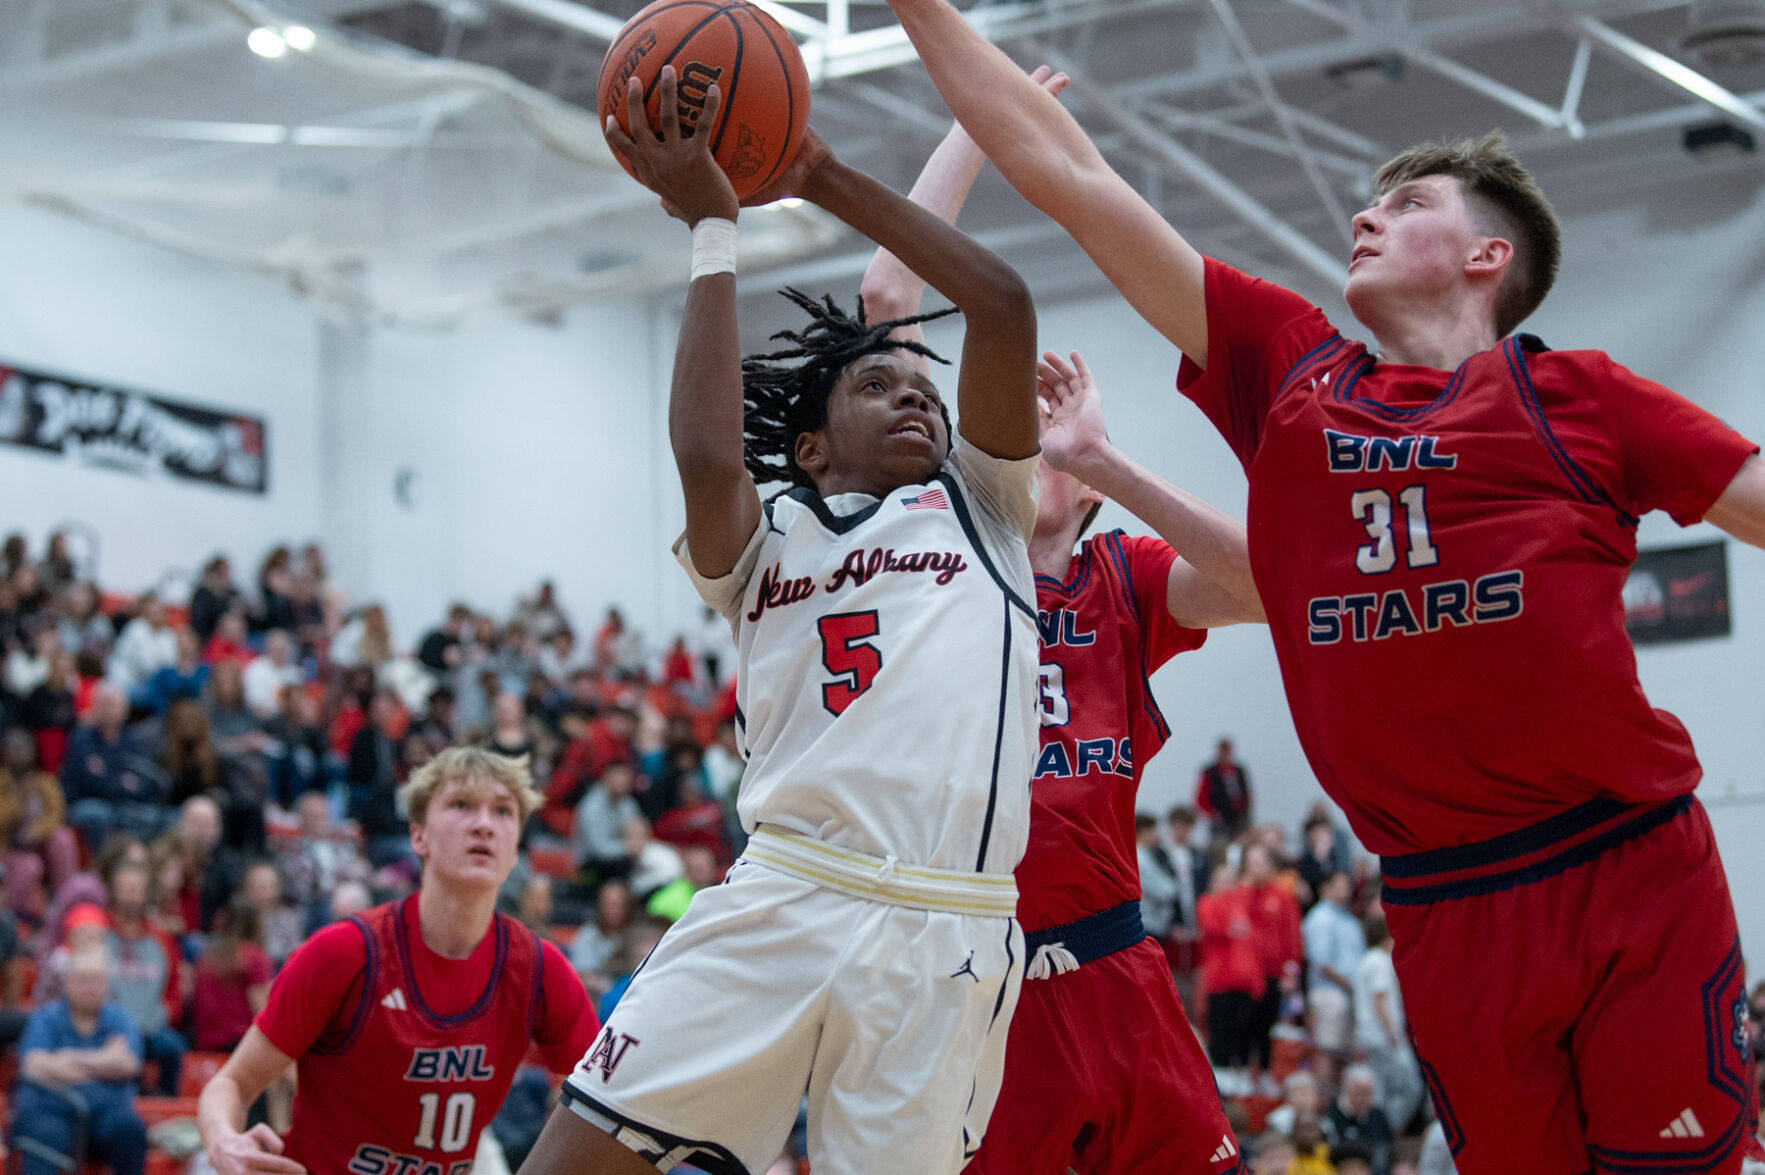 New Albany Beats Bedford North Lawrence 73-71: Lampkins Shines with 19 Points